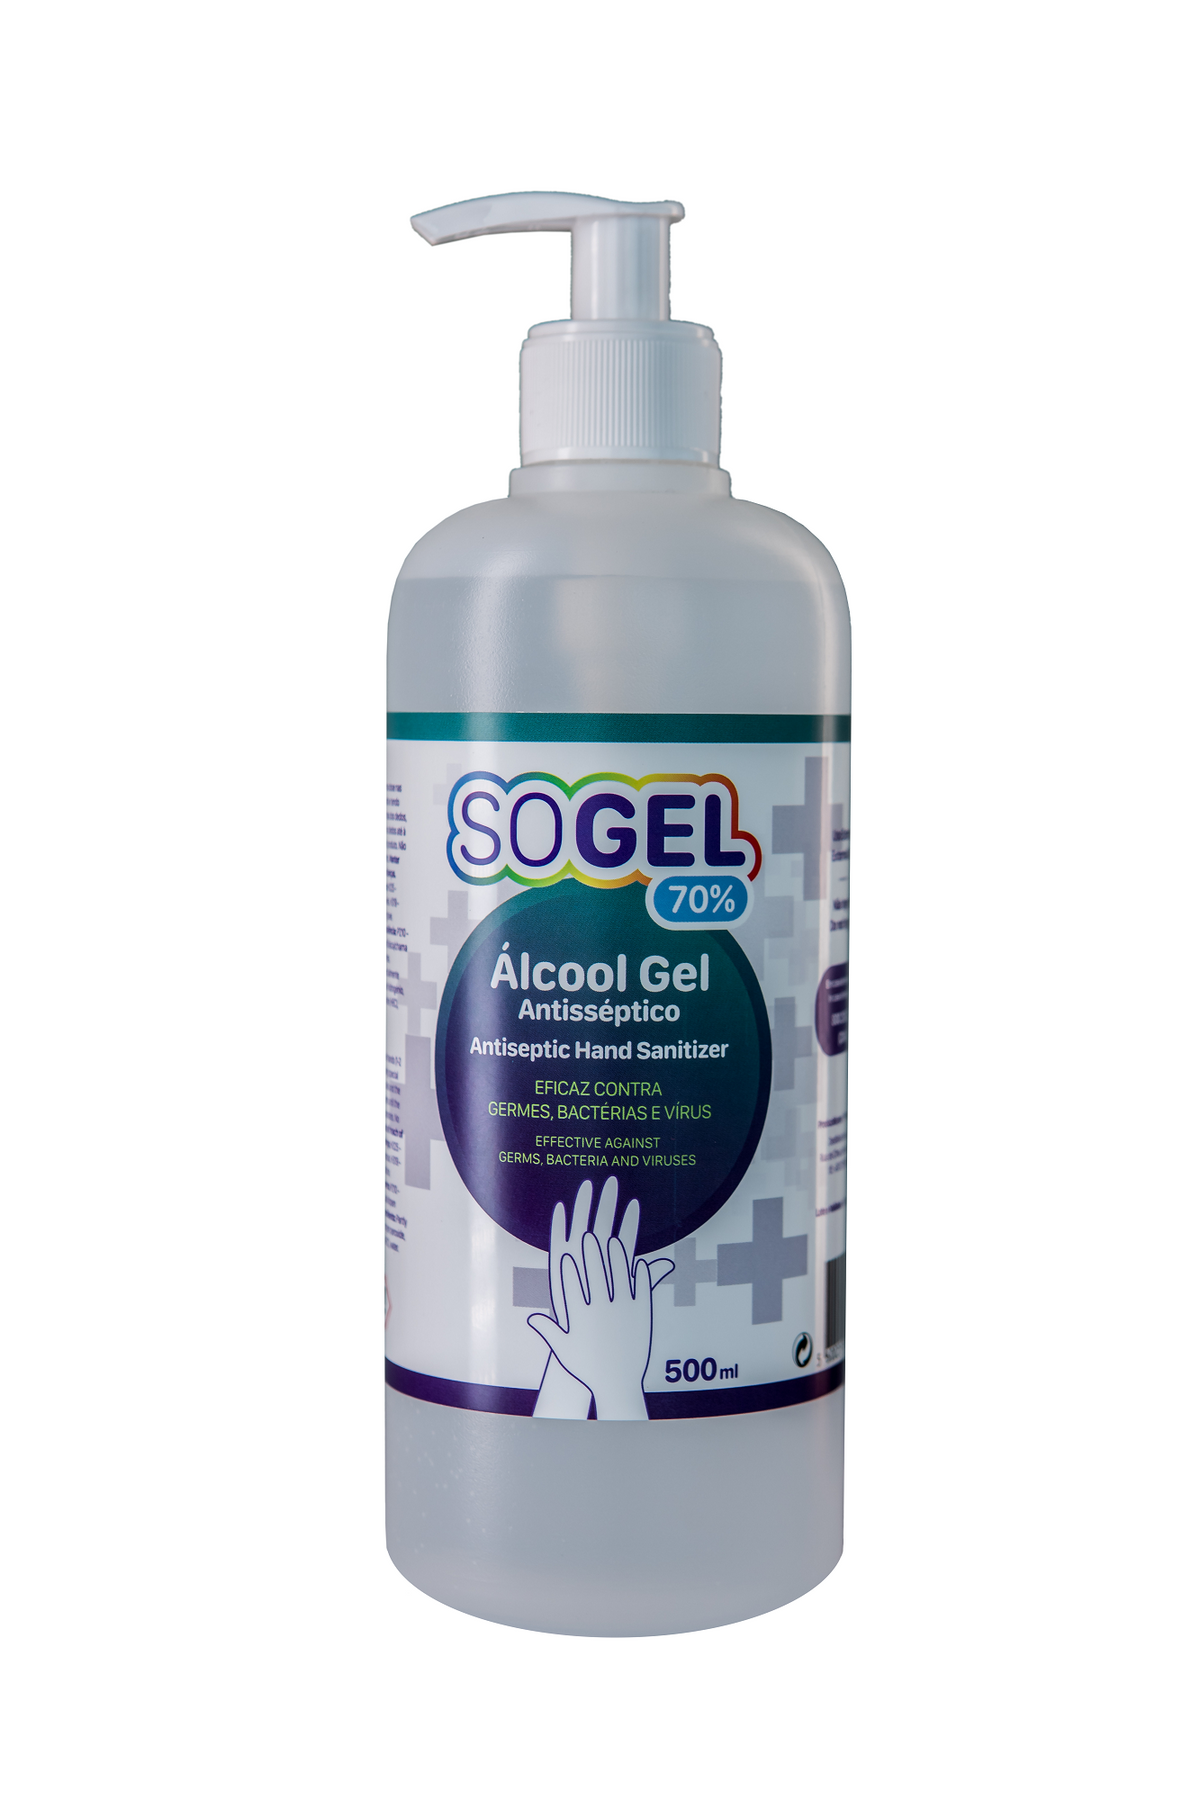 Alcohol Gel Antiseptic Sogel 70% 500ml with pump